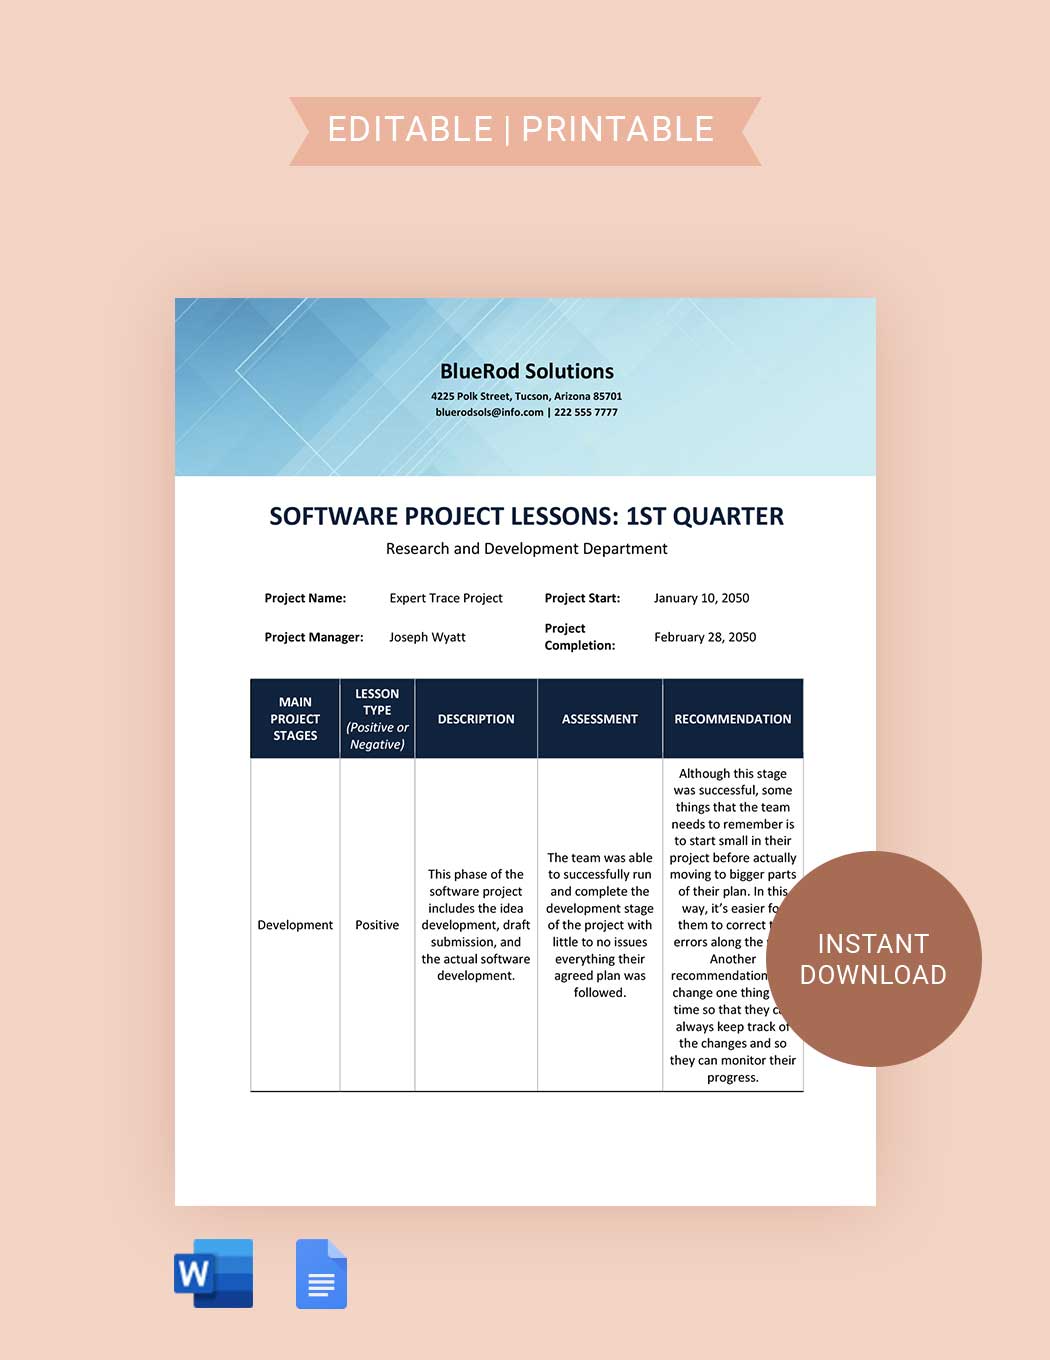 Software Project Lessons Learned Template